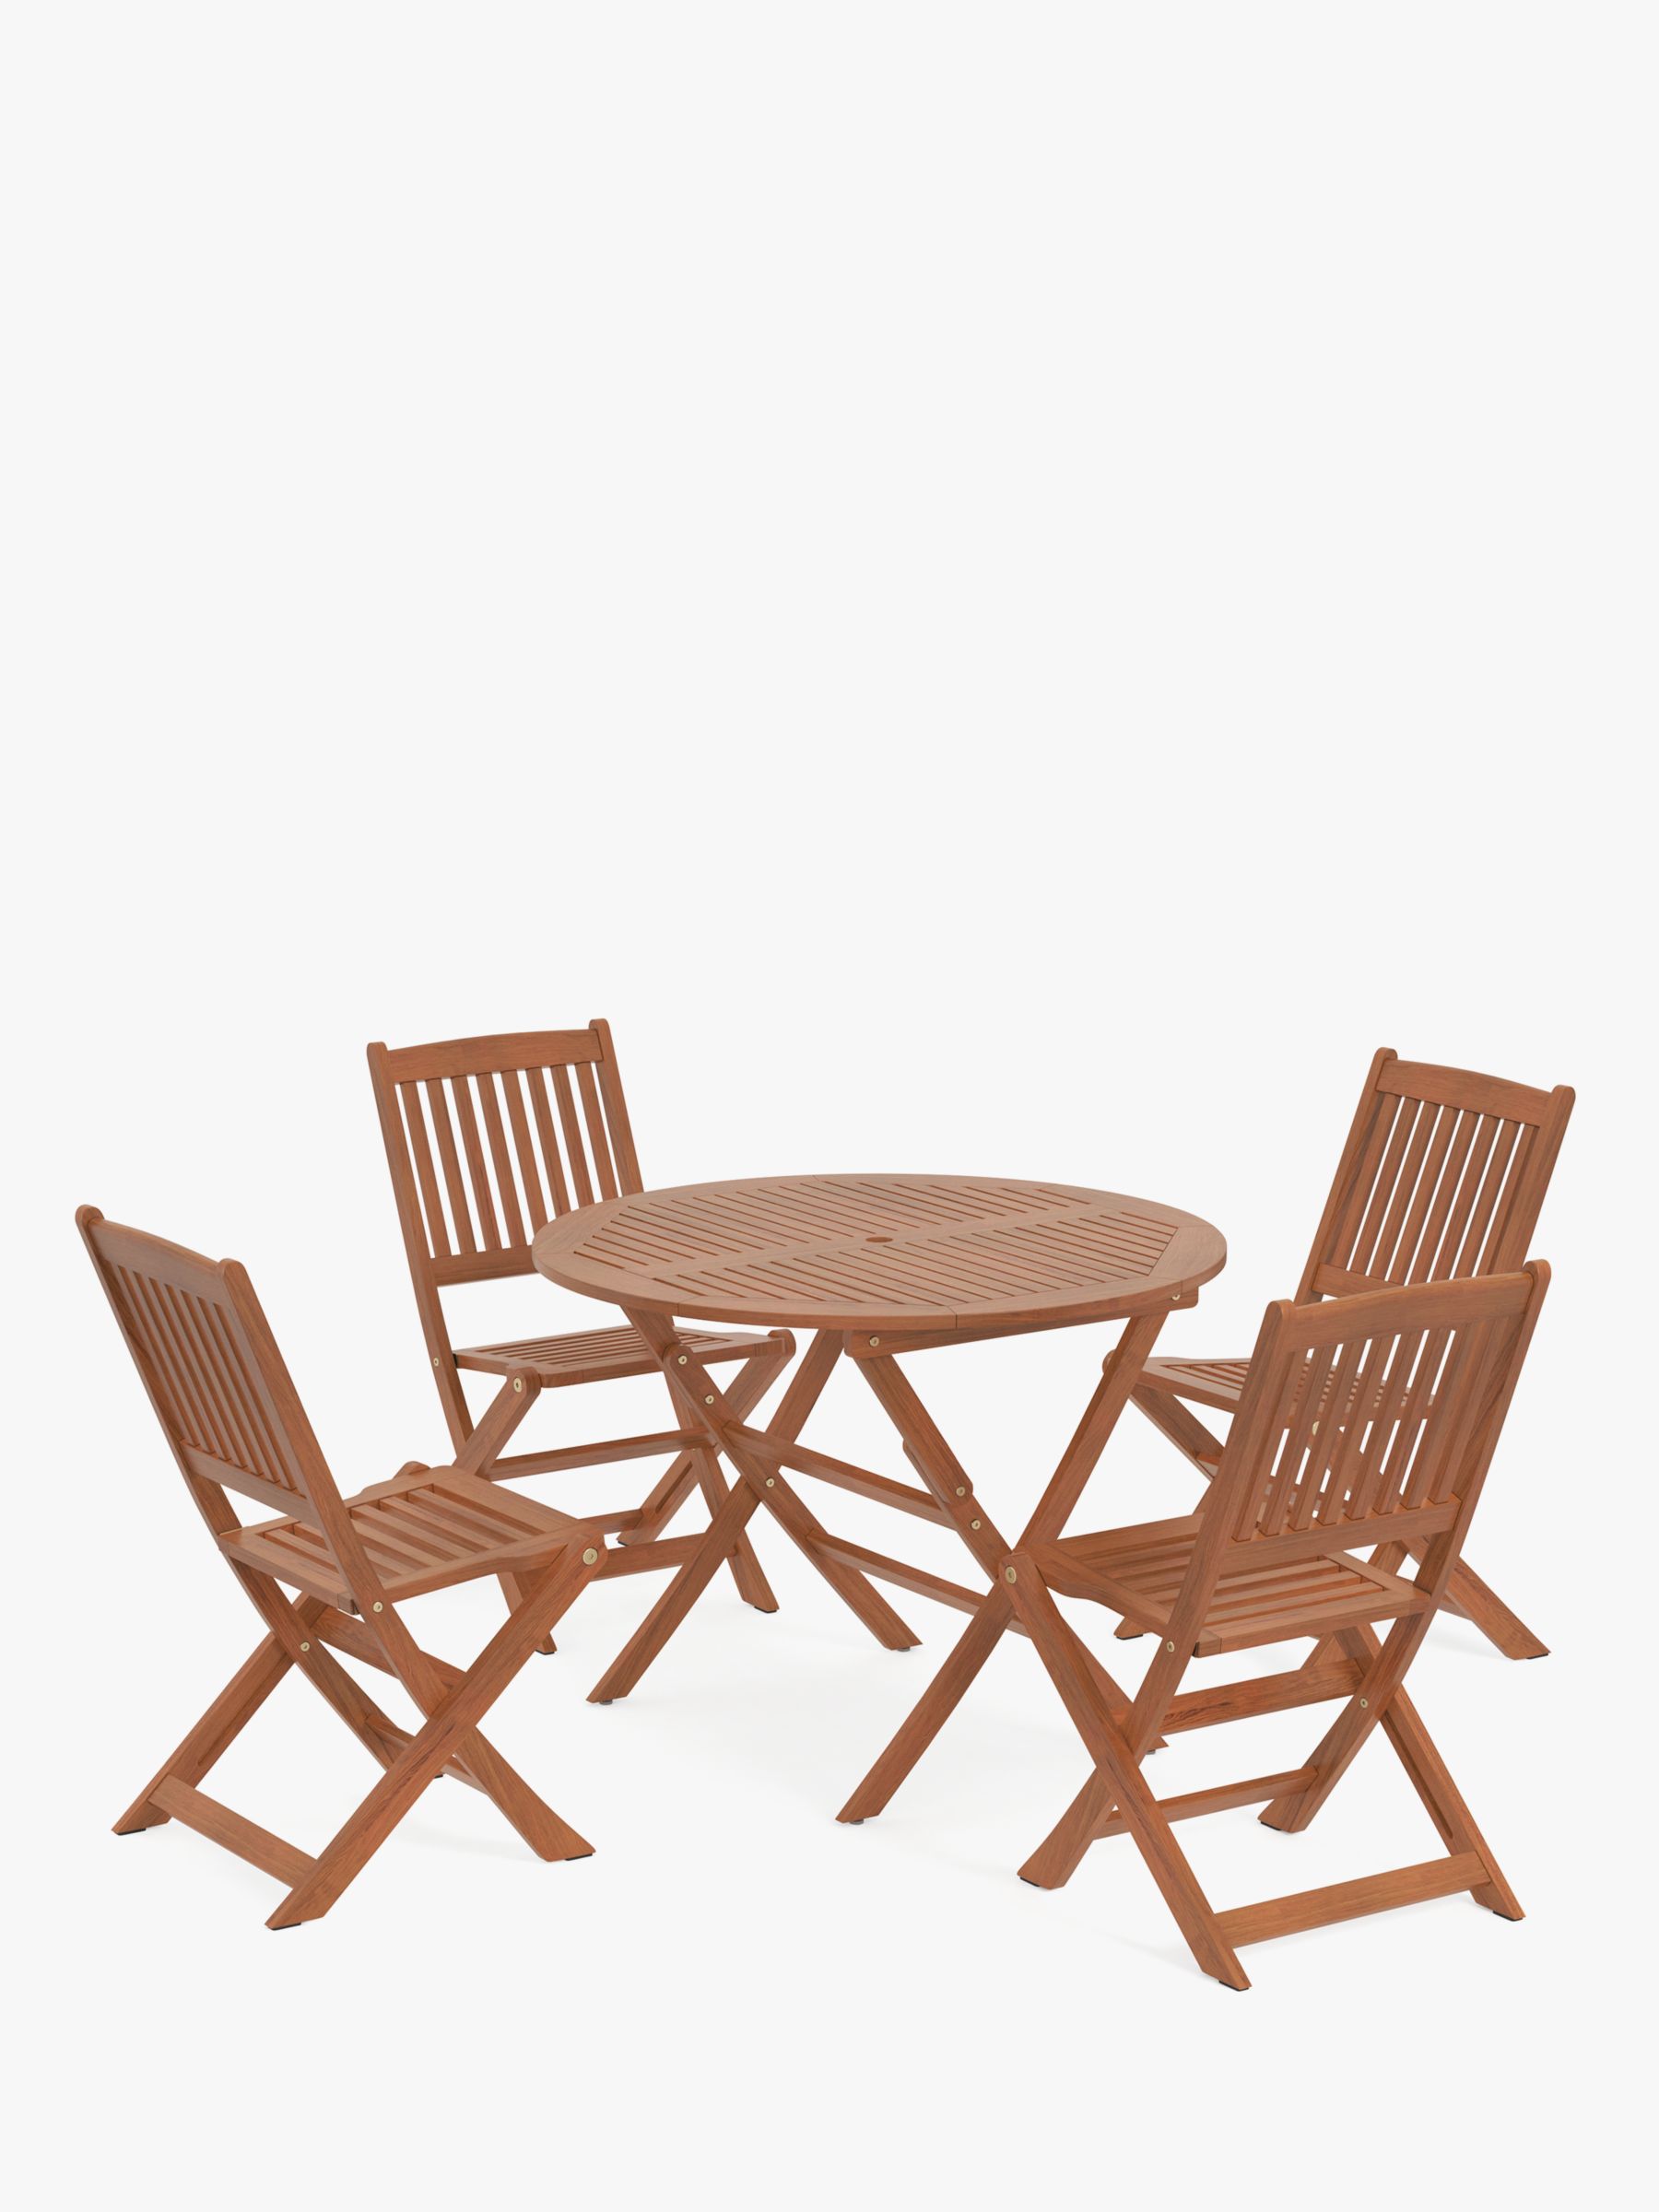 Photo of John lewis anyday 4-seater folding garden dining table & chairs set fsc-certified -eucalyptus wood- natural